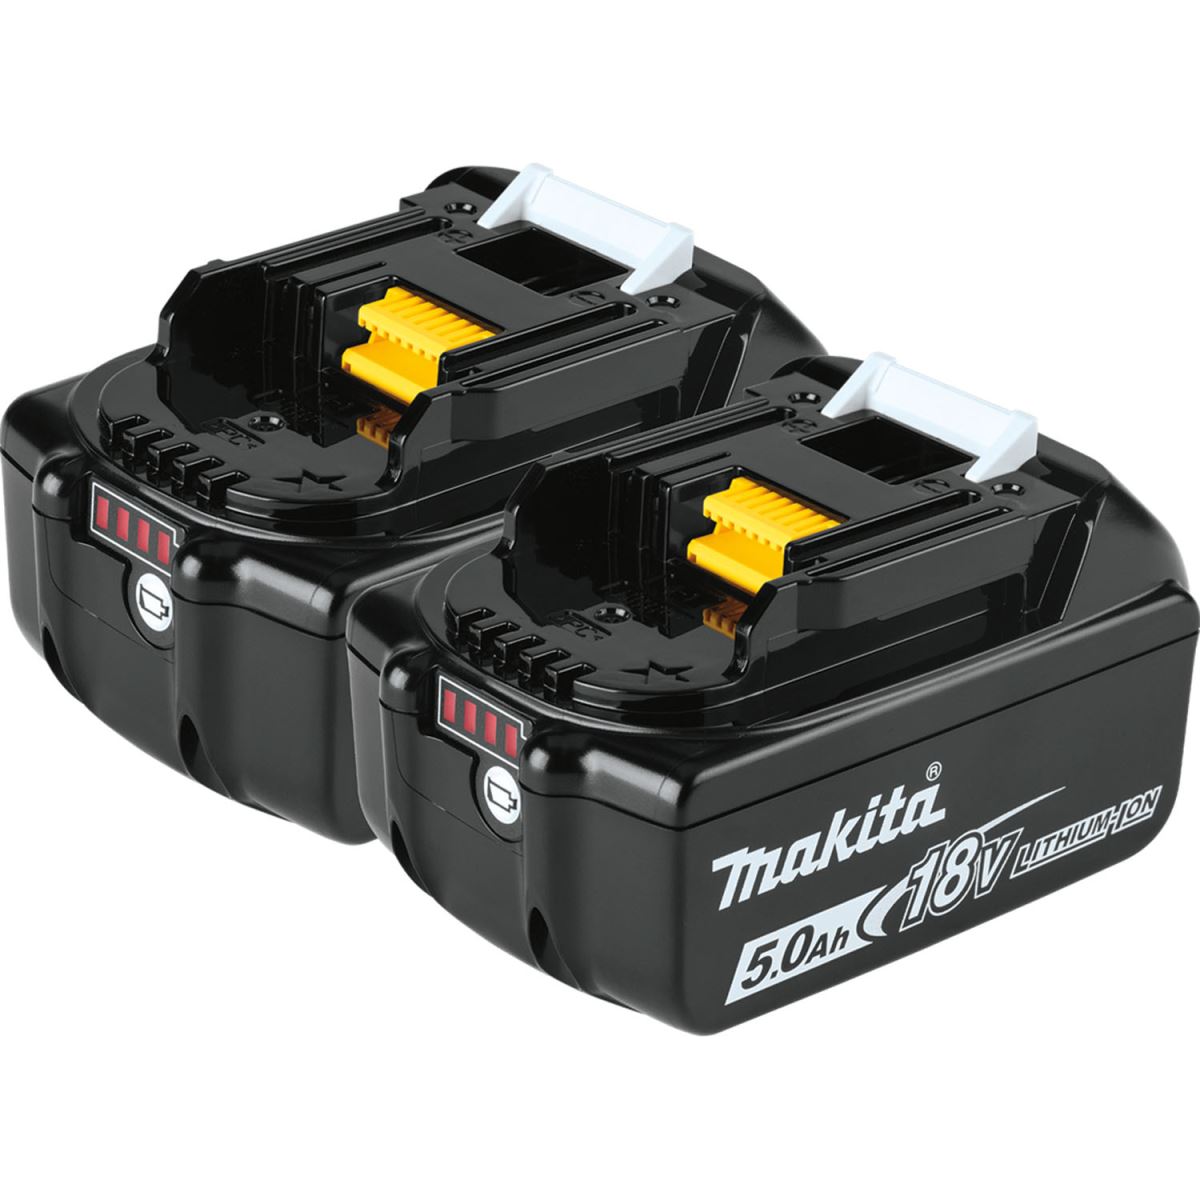 18V LXT LITHIUM-ION 5.0AH BATTERY 2 PACK